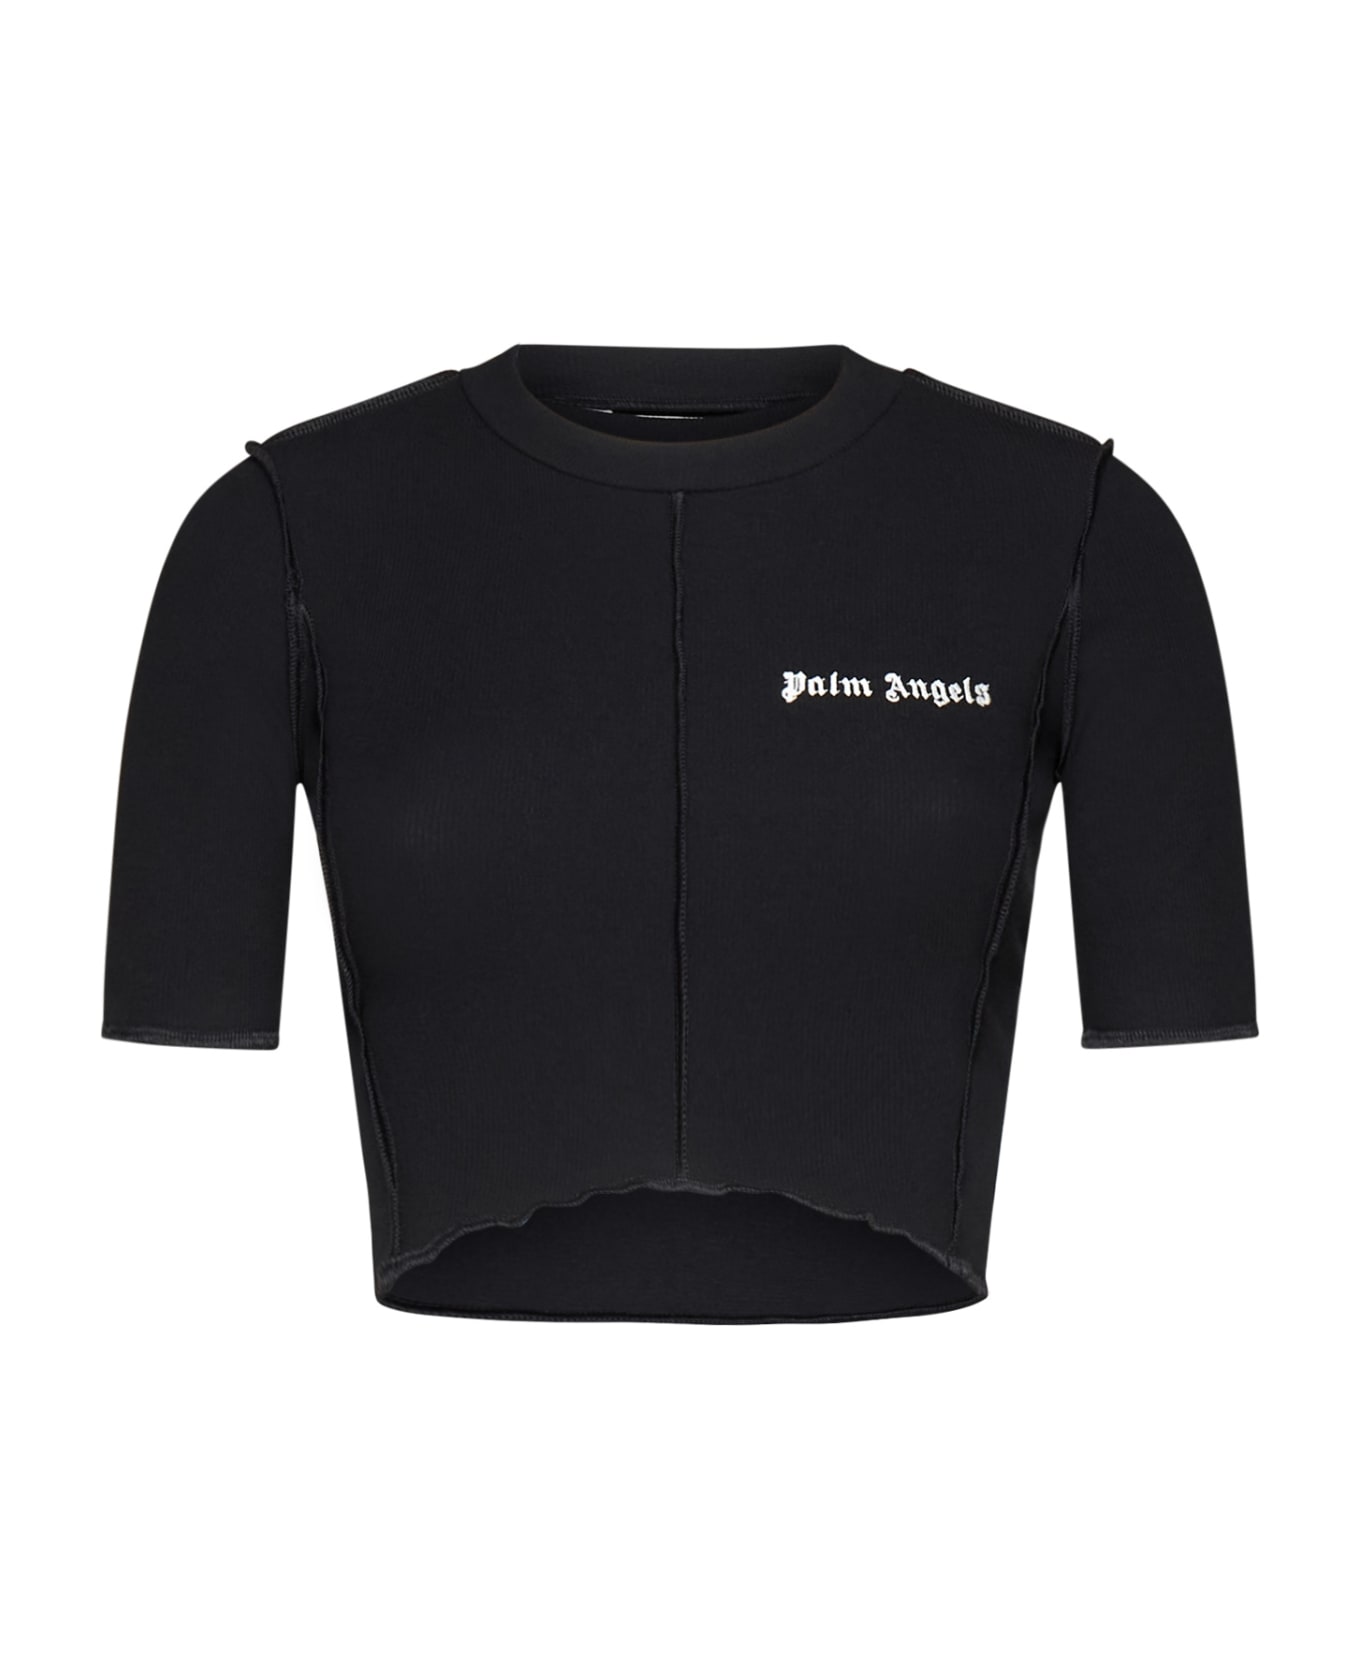 Palm Angels Logo Cropped Top - Black off white Tシャツ